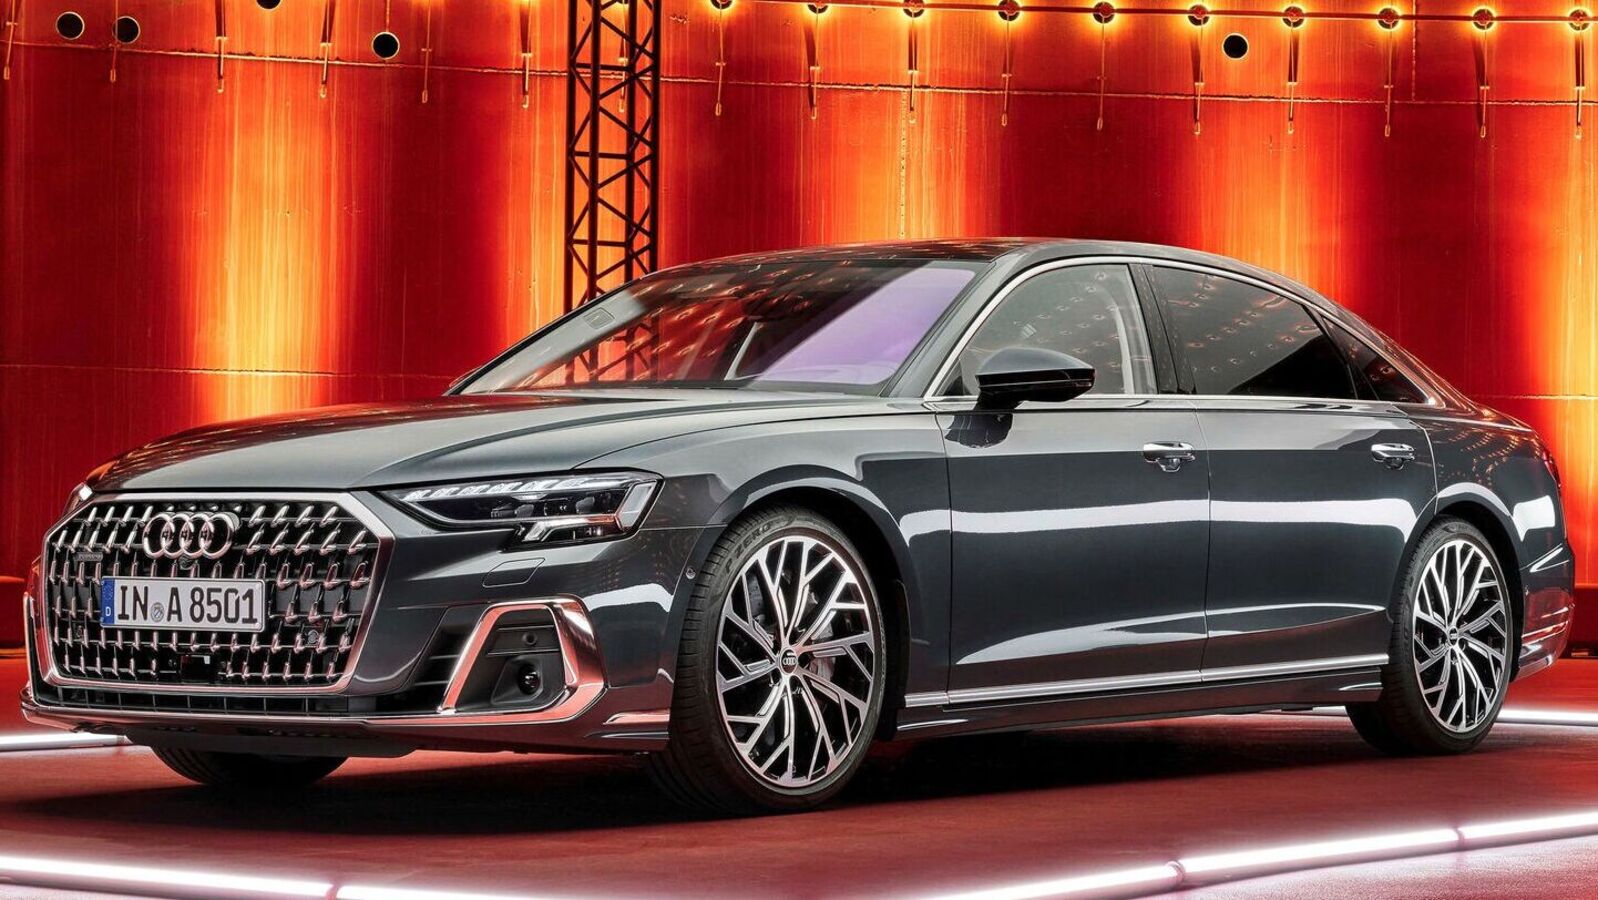 2022 Audi A8 L Bookings Open In India For Rs. 10 Lakh; Launch Soon